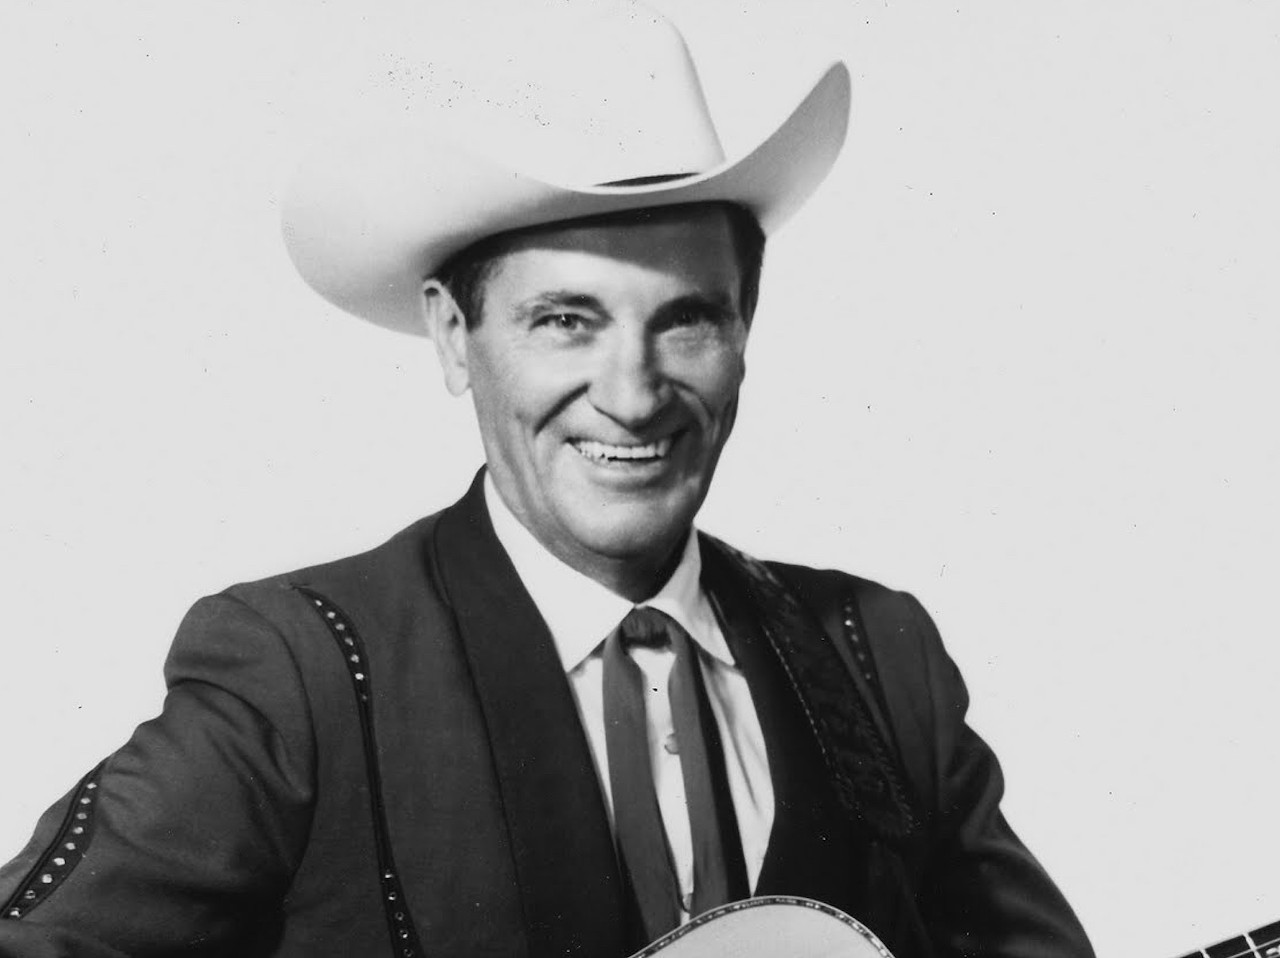 Ernest Tubb
Country music pioneer Ernest Tubb, known as the “Texas Troubadour,” took a job as a singer for San Antonio radio station KONO-AM in the 1930s. He later relocated to Nashville and became one of the fixtures on the Grand Ole Opry.